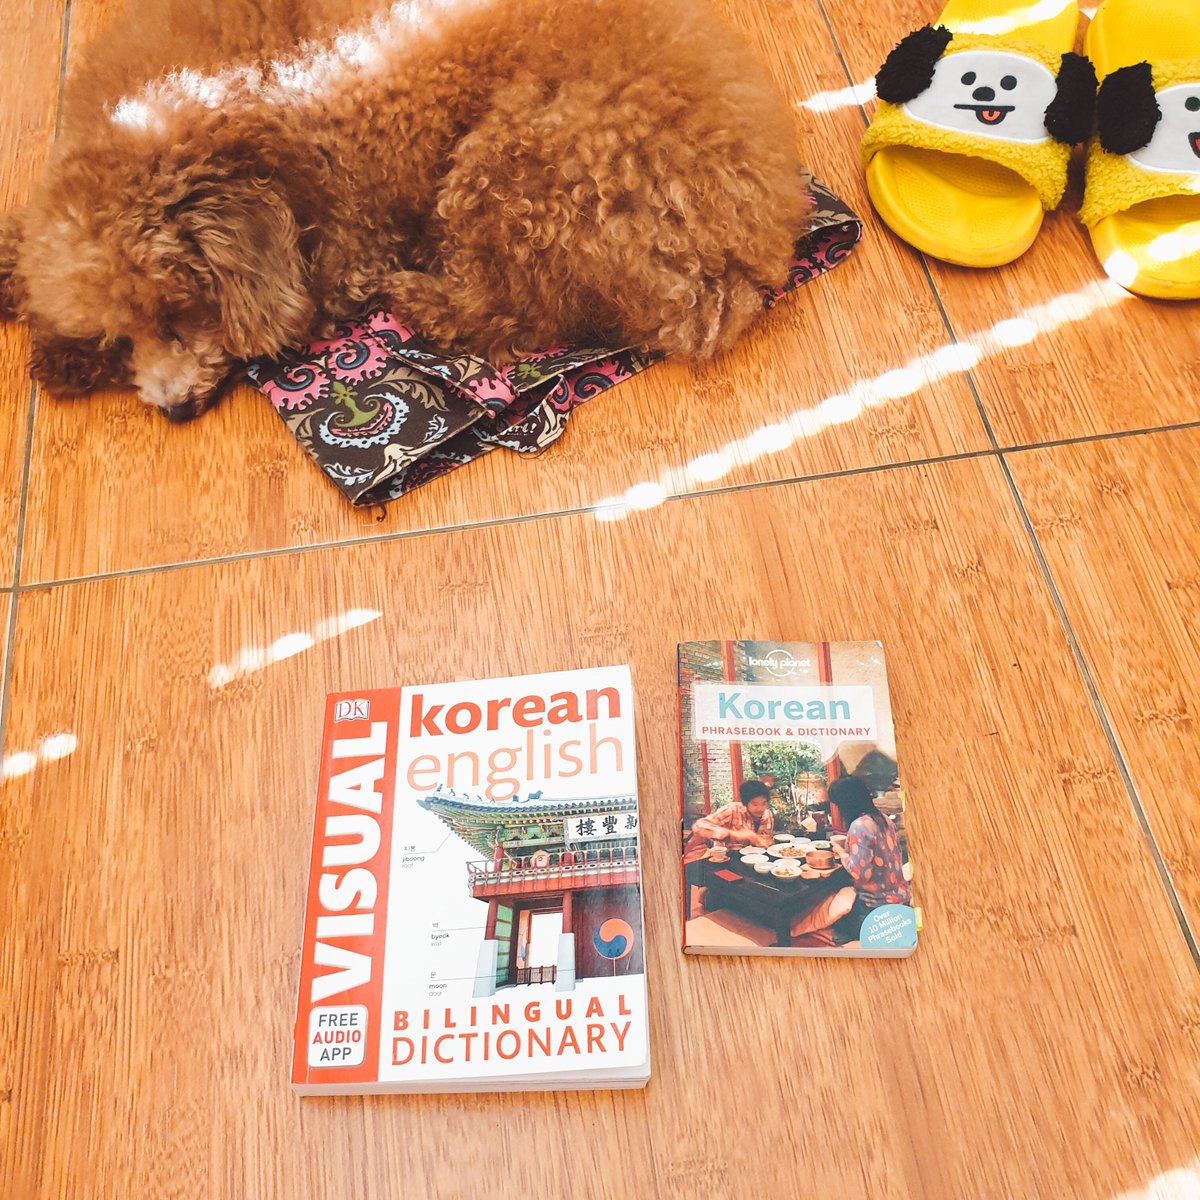 Hi ARMYs  if you're looking for a book to learn Basic Korean Language that's easy & practical. I really recommend this 2 books- Lonely Planet Korean phrasebook & dictionary (pocket size)- DK Korean Eng visual Bilingual DictionaryDetails on thread